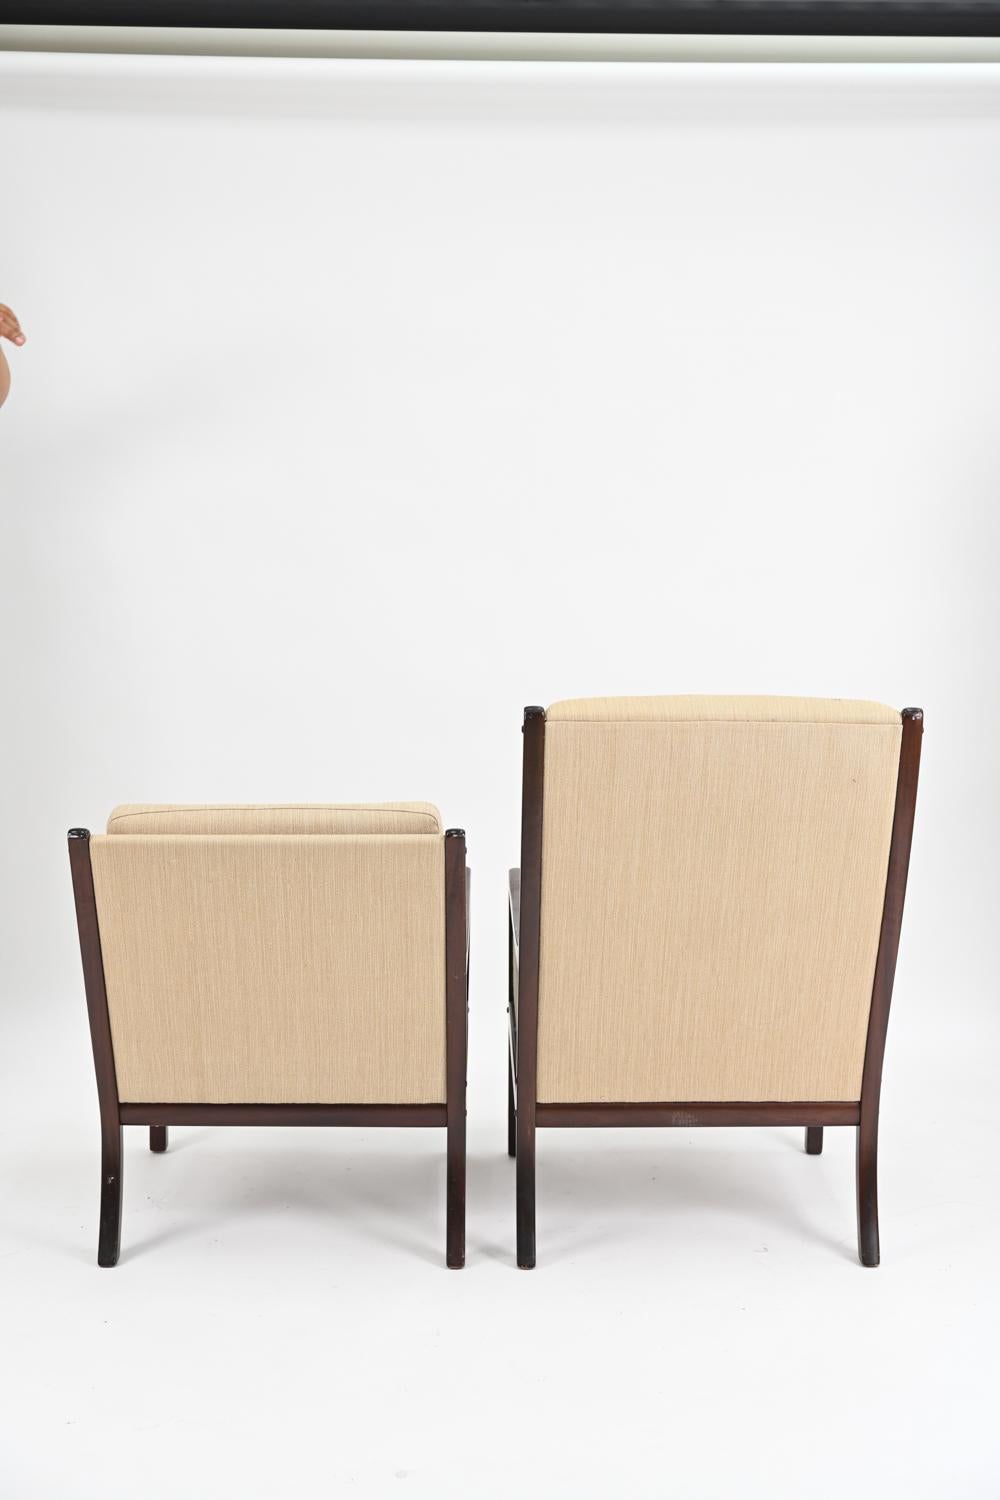 Mid-20th Century Pair of Ole Wanscher for Poul Jeppesens Møbelfabrik Lounge Chairs